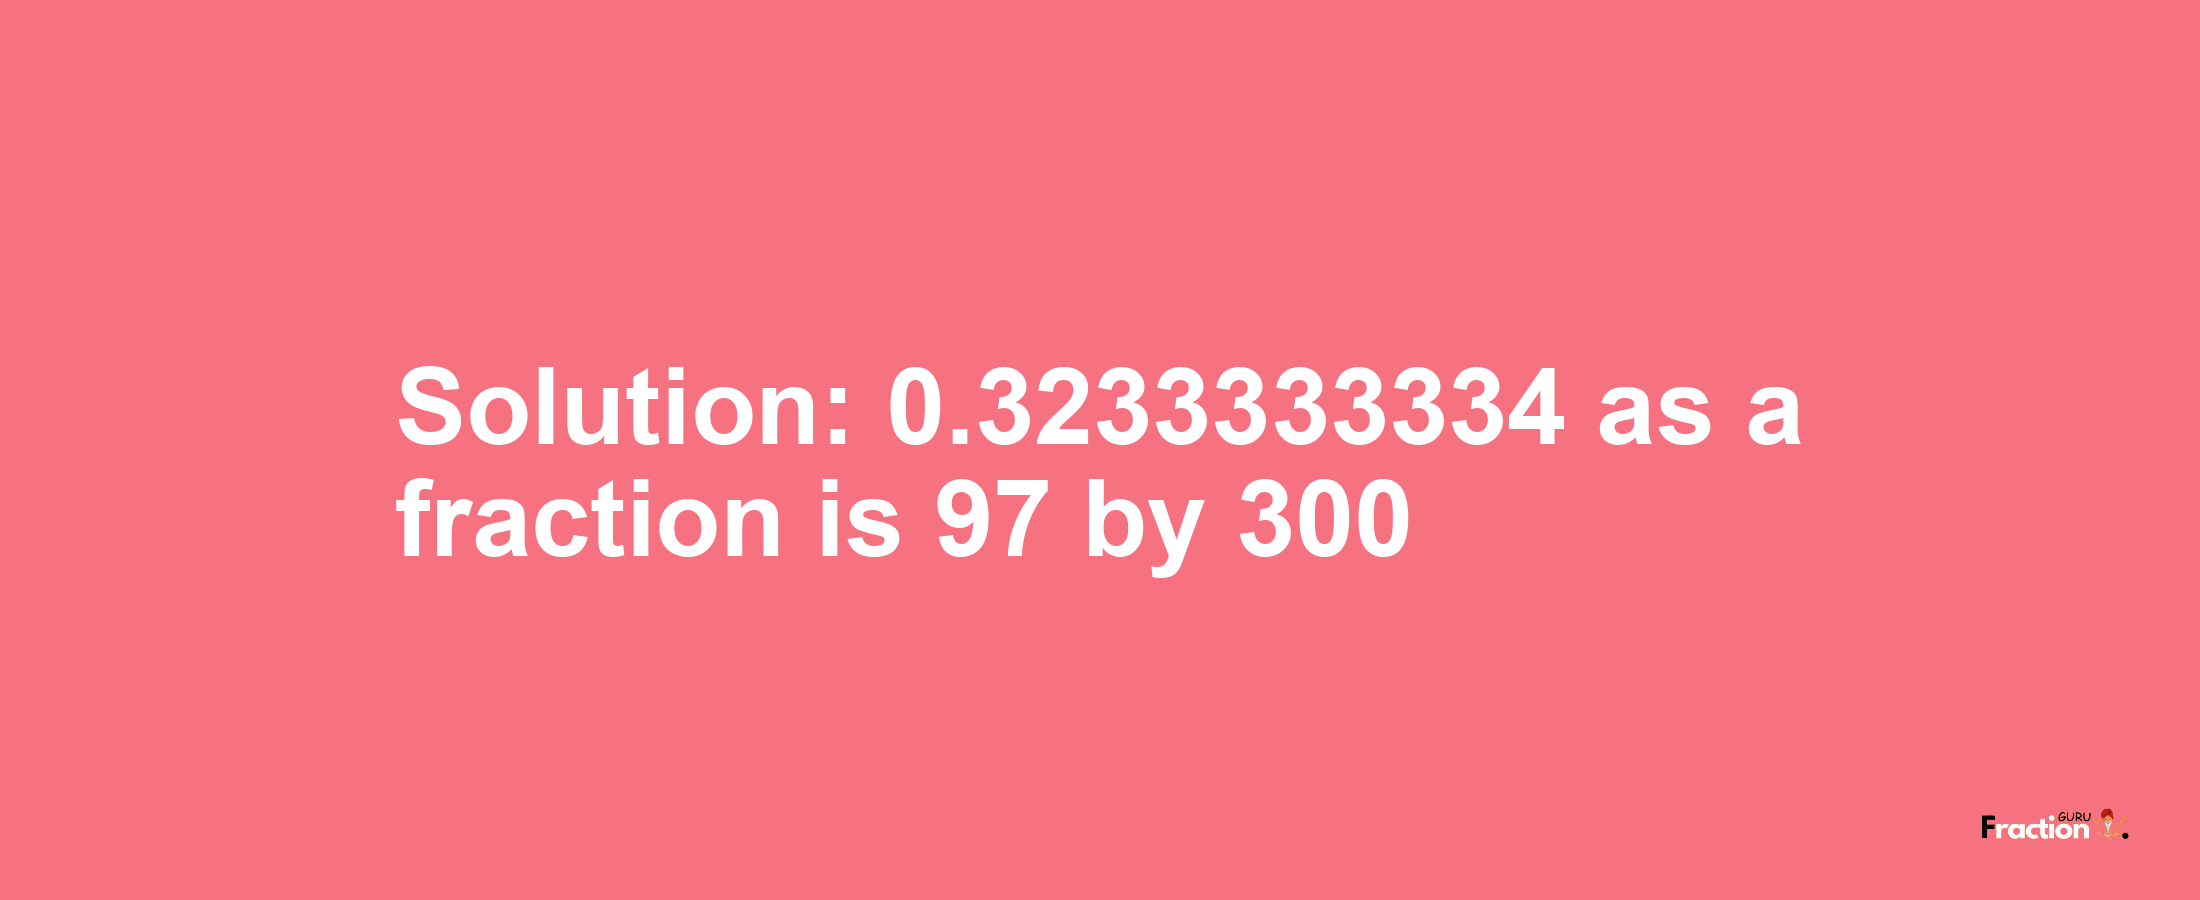 Solution:0.3233333334 as a fraction is 97/300